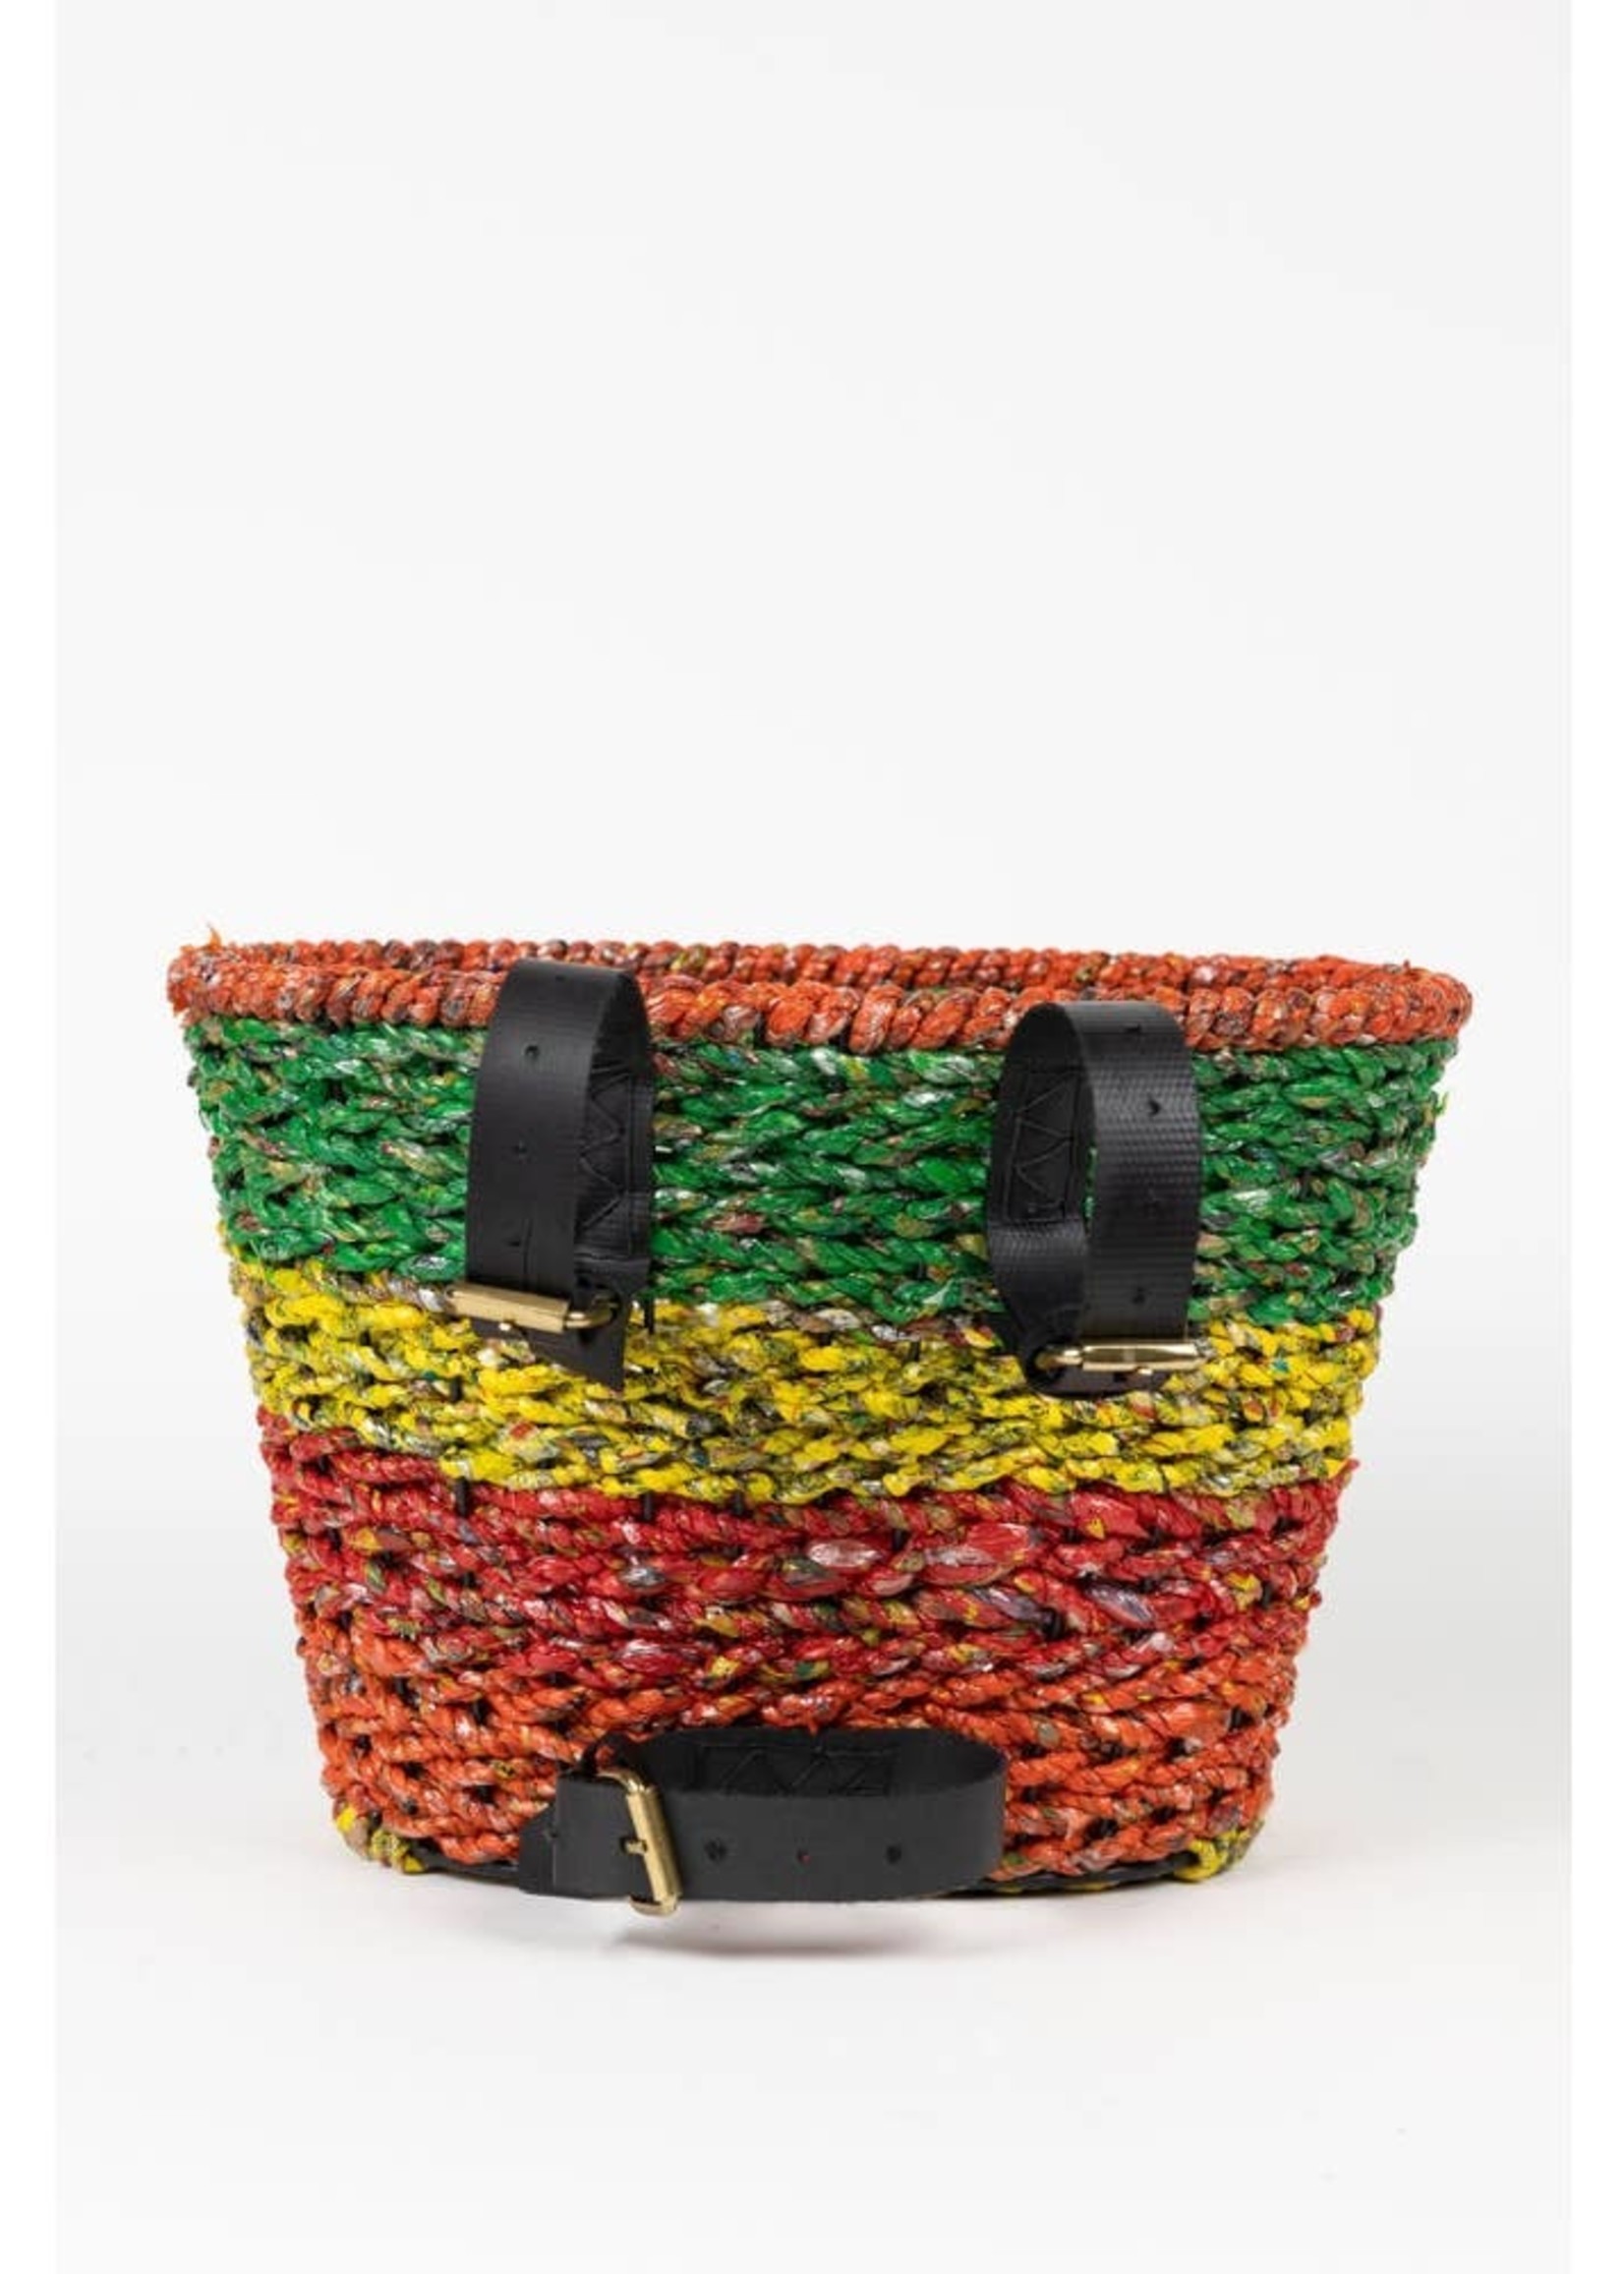 Candy Wrapper Bicycle Basket